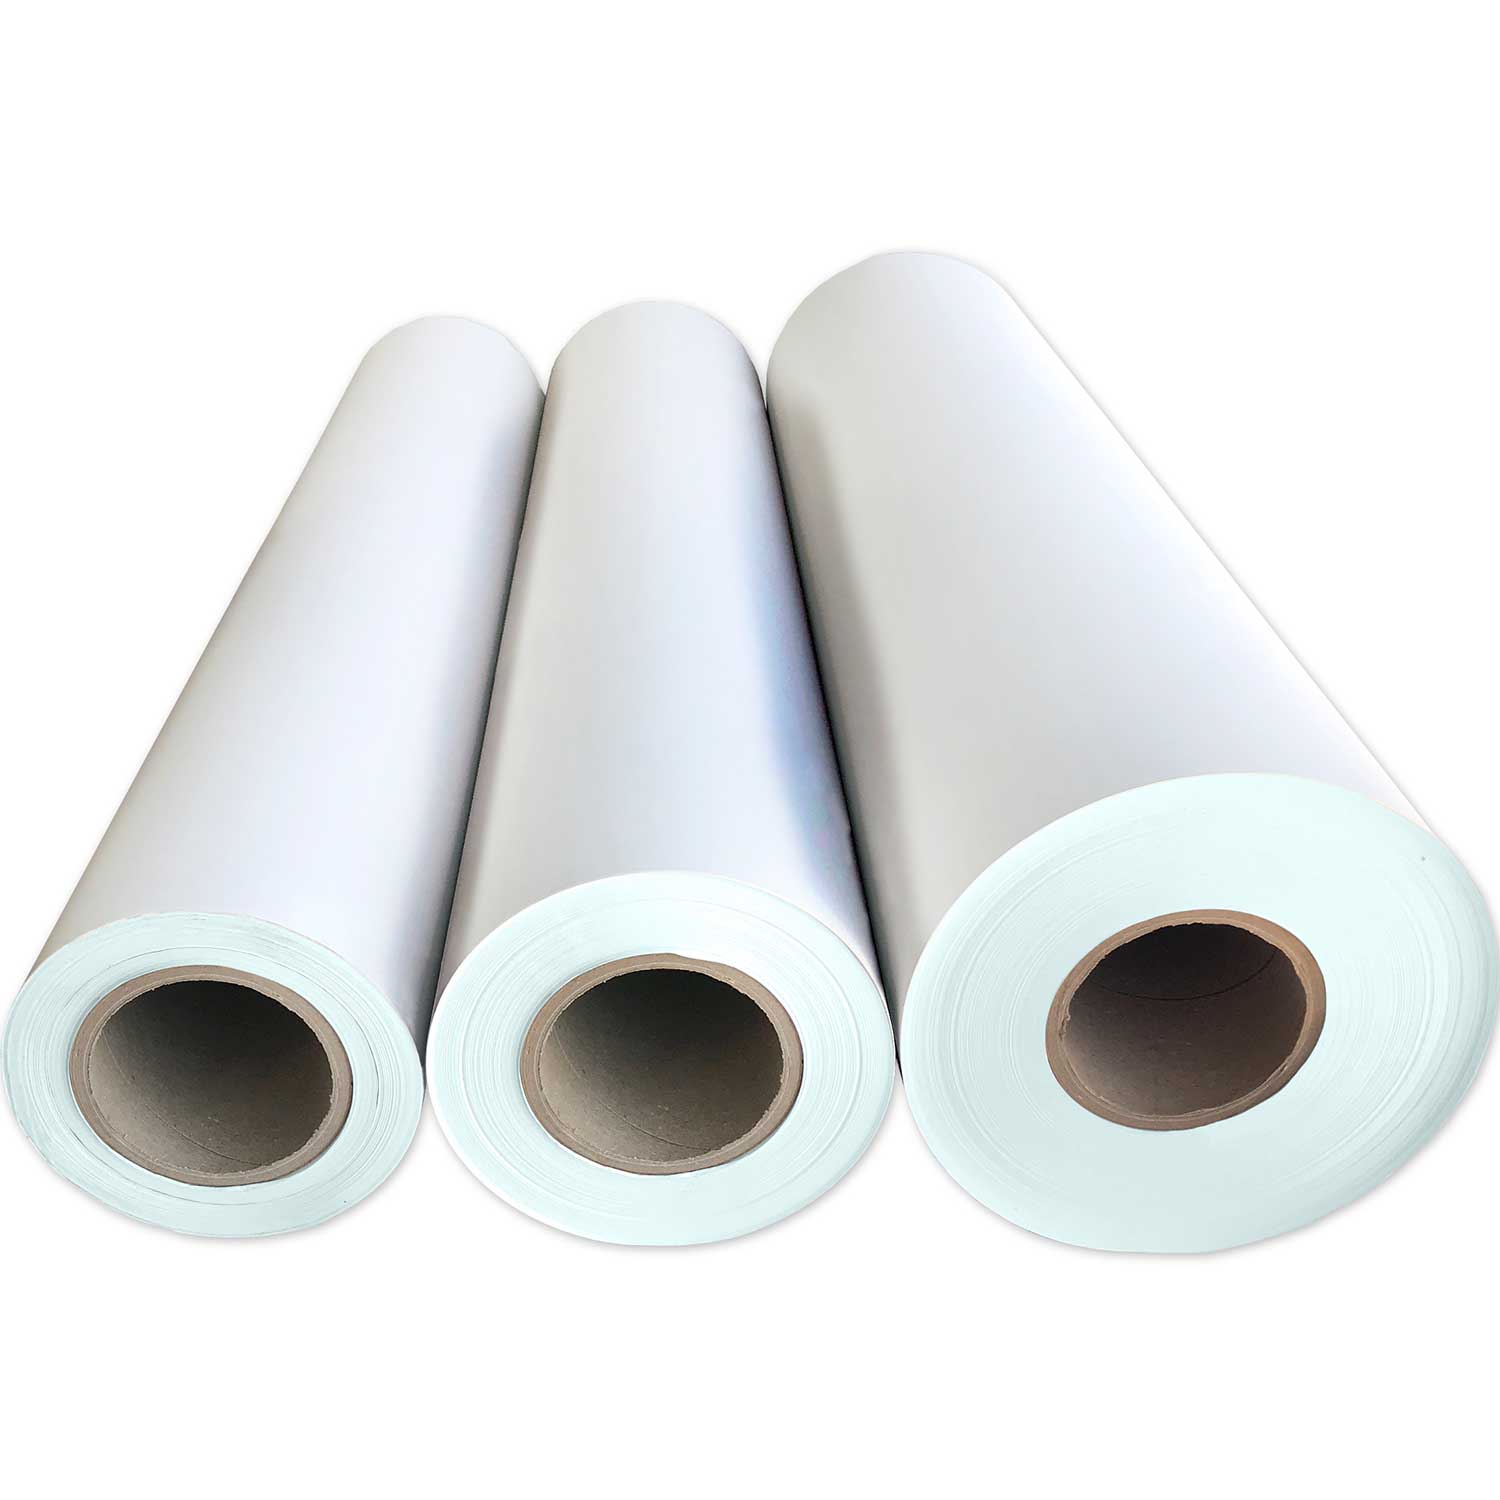 4 Rolls - Matte White Wrapping Paper 30 X 50Ft Per Roll